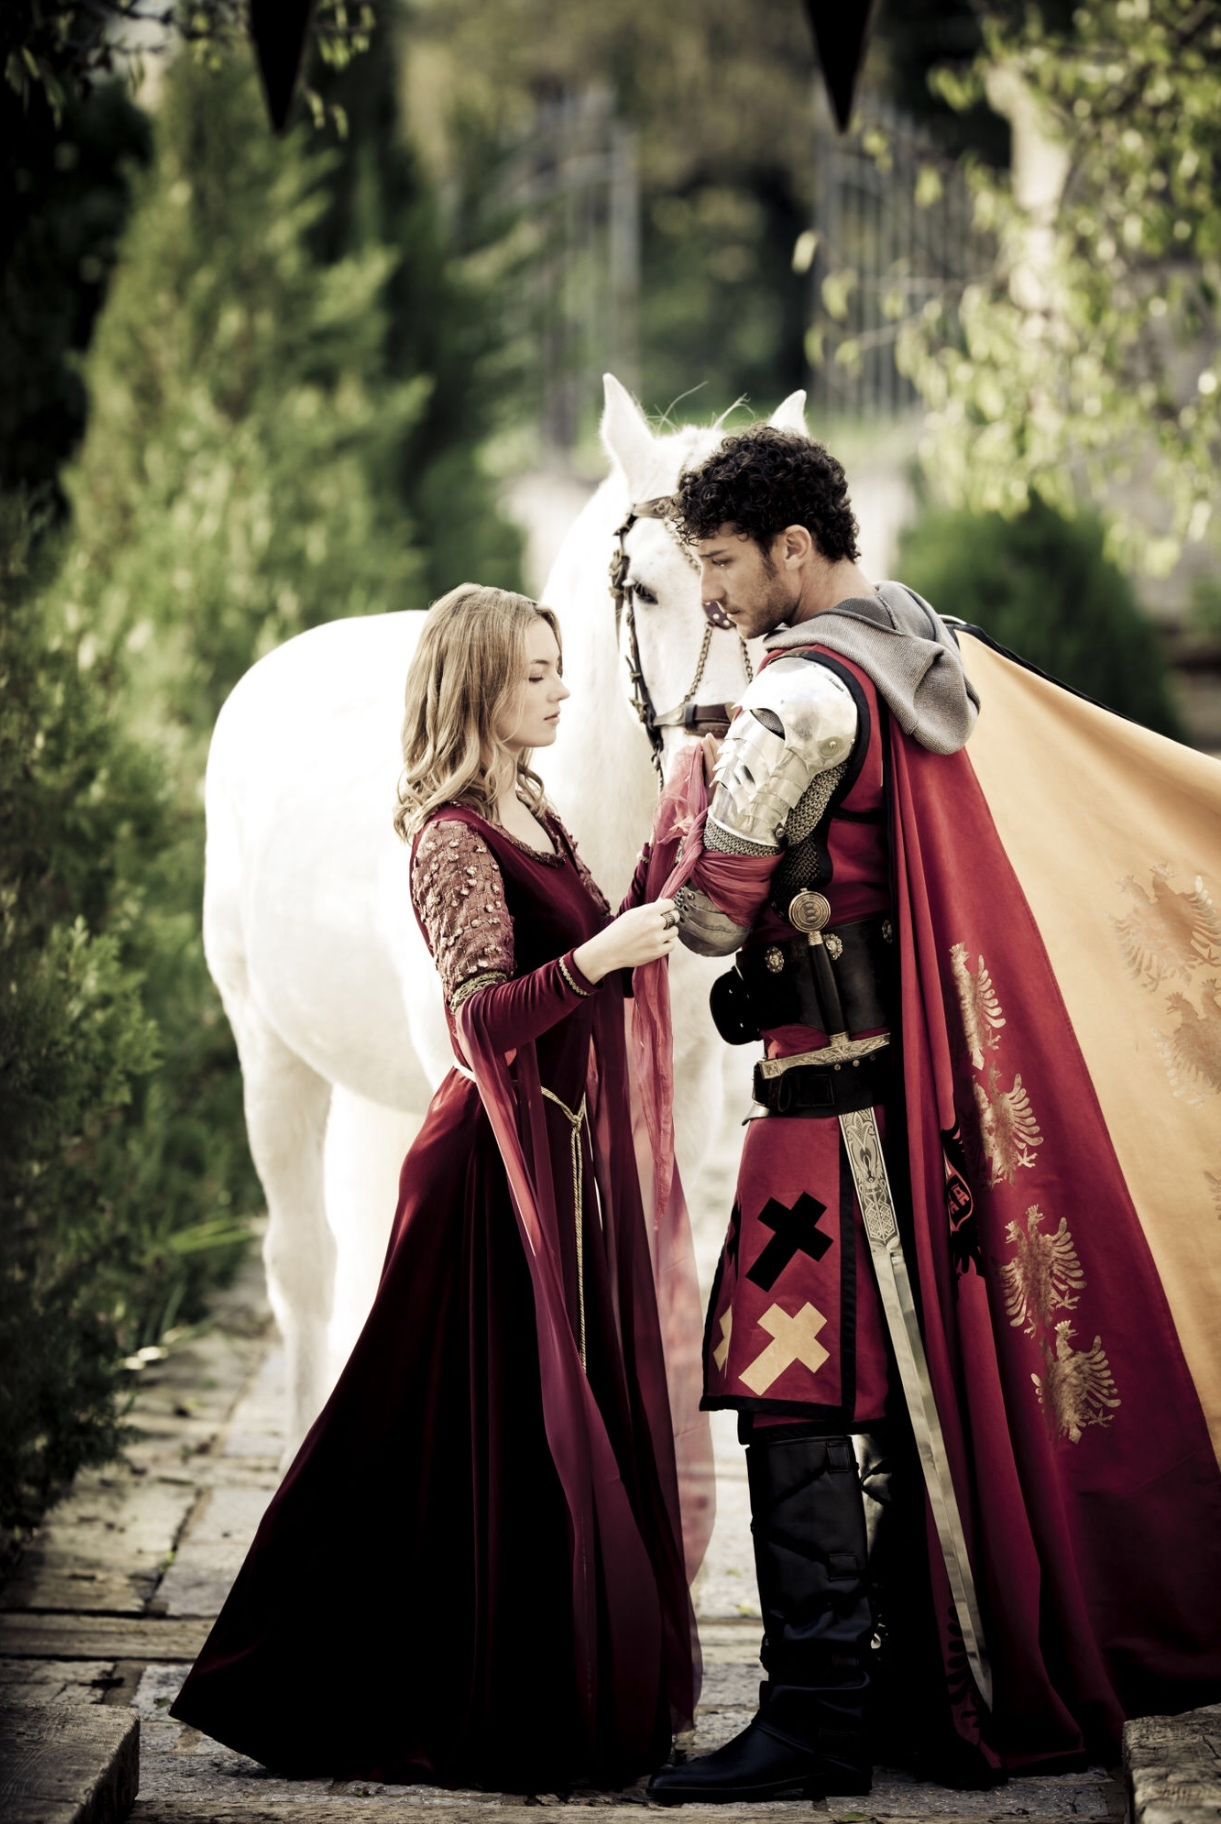 Farewell scene between medieval princess and knight for novel